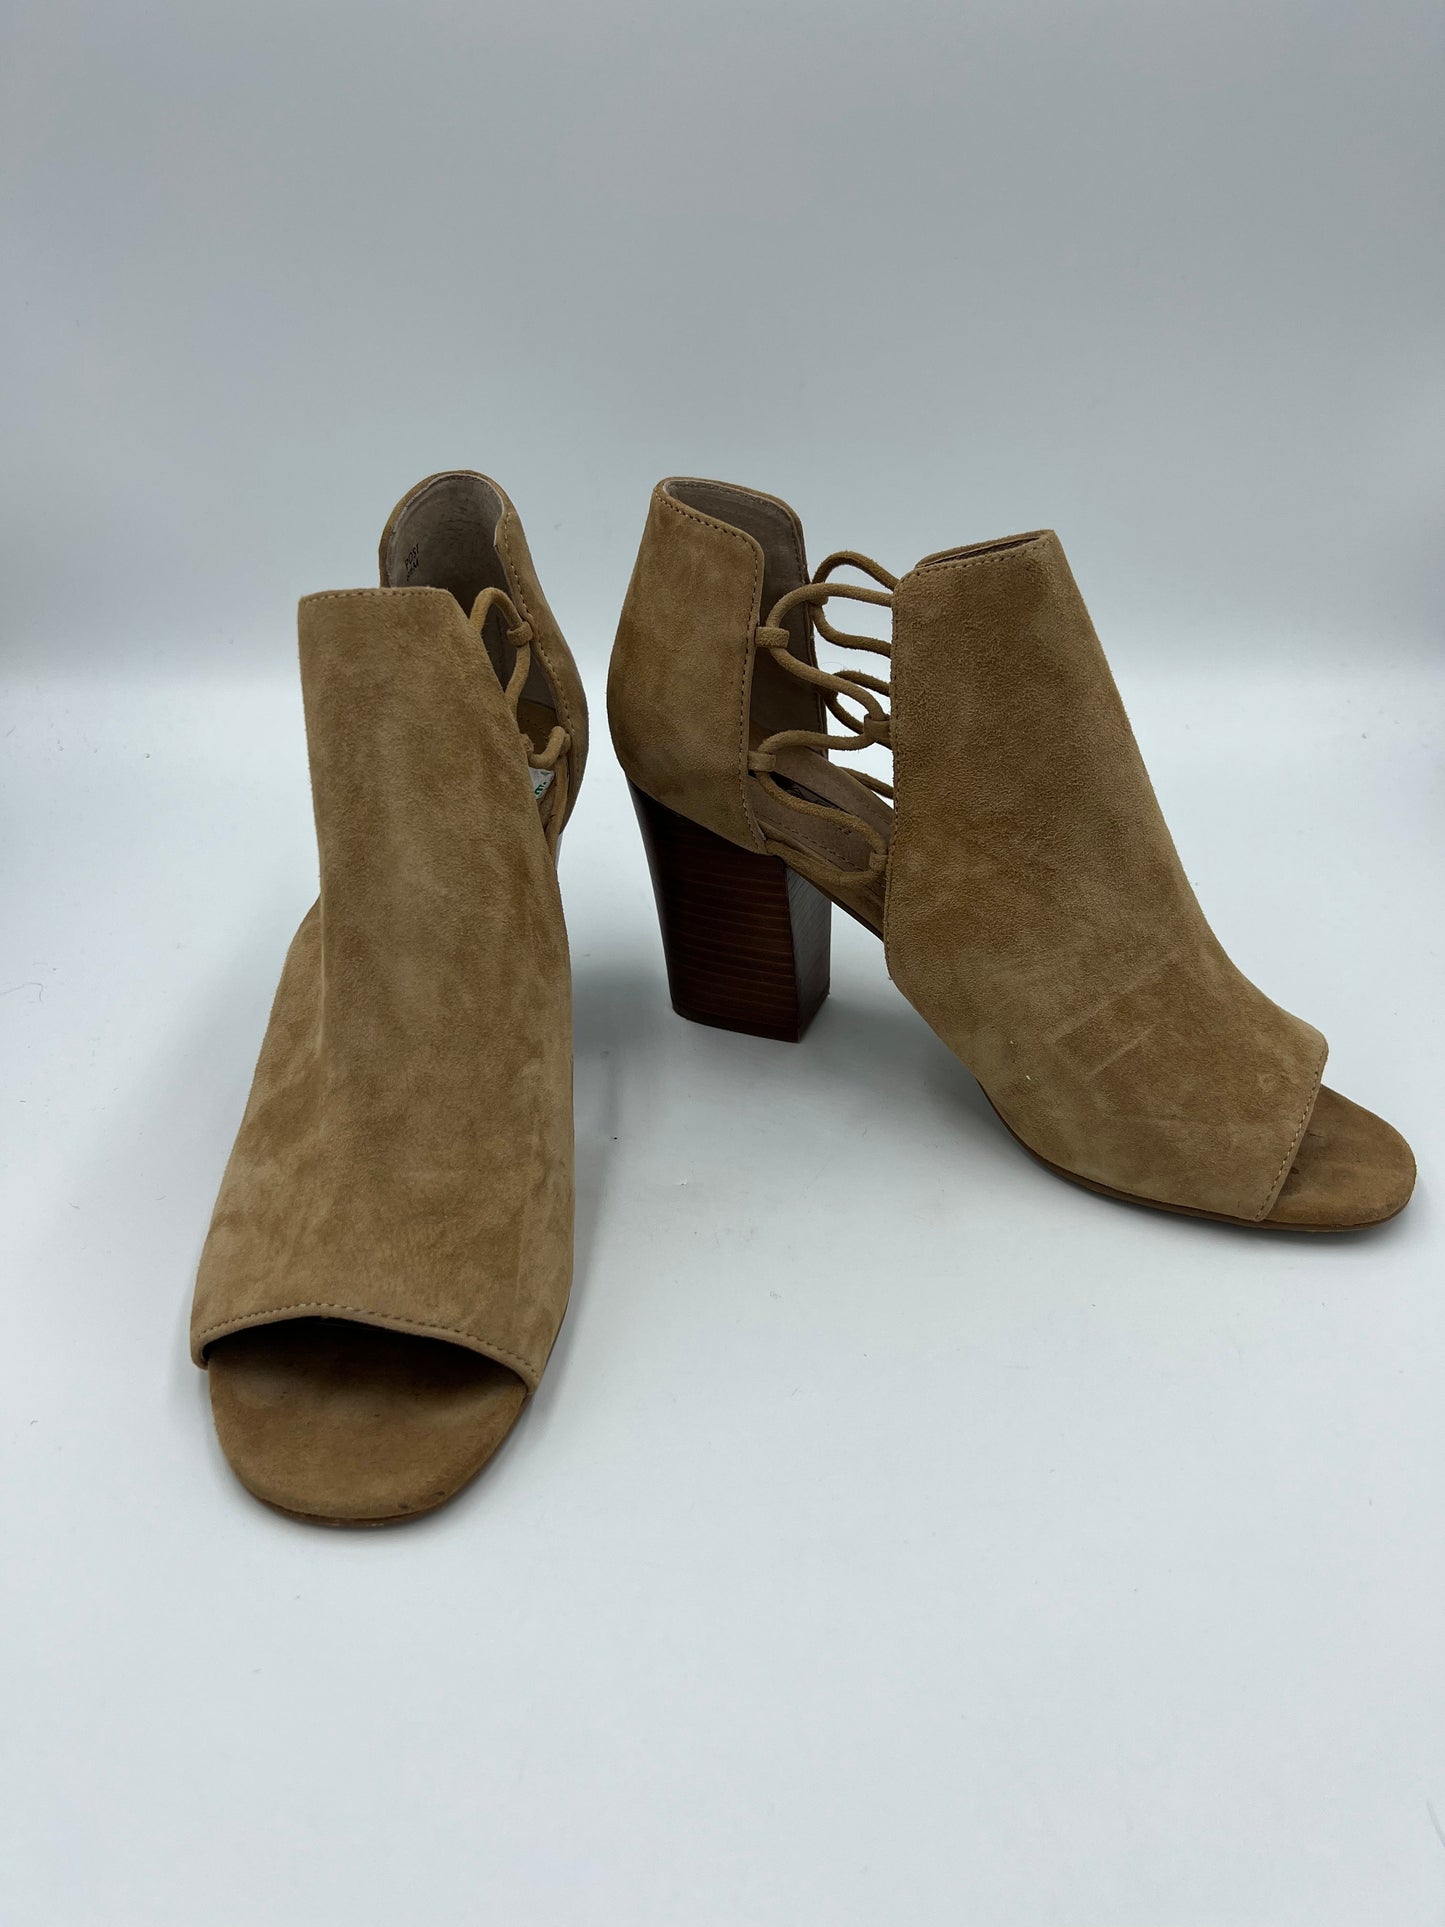 Boots Designer By Tahari  Size: 8.5